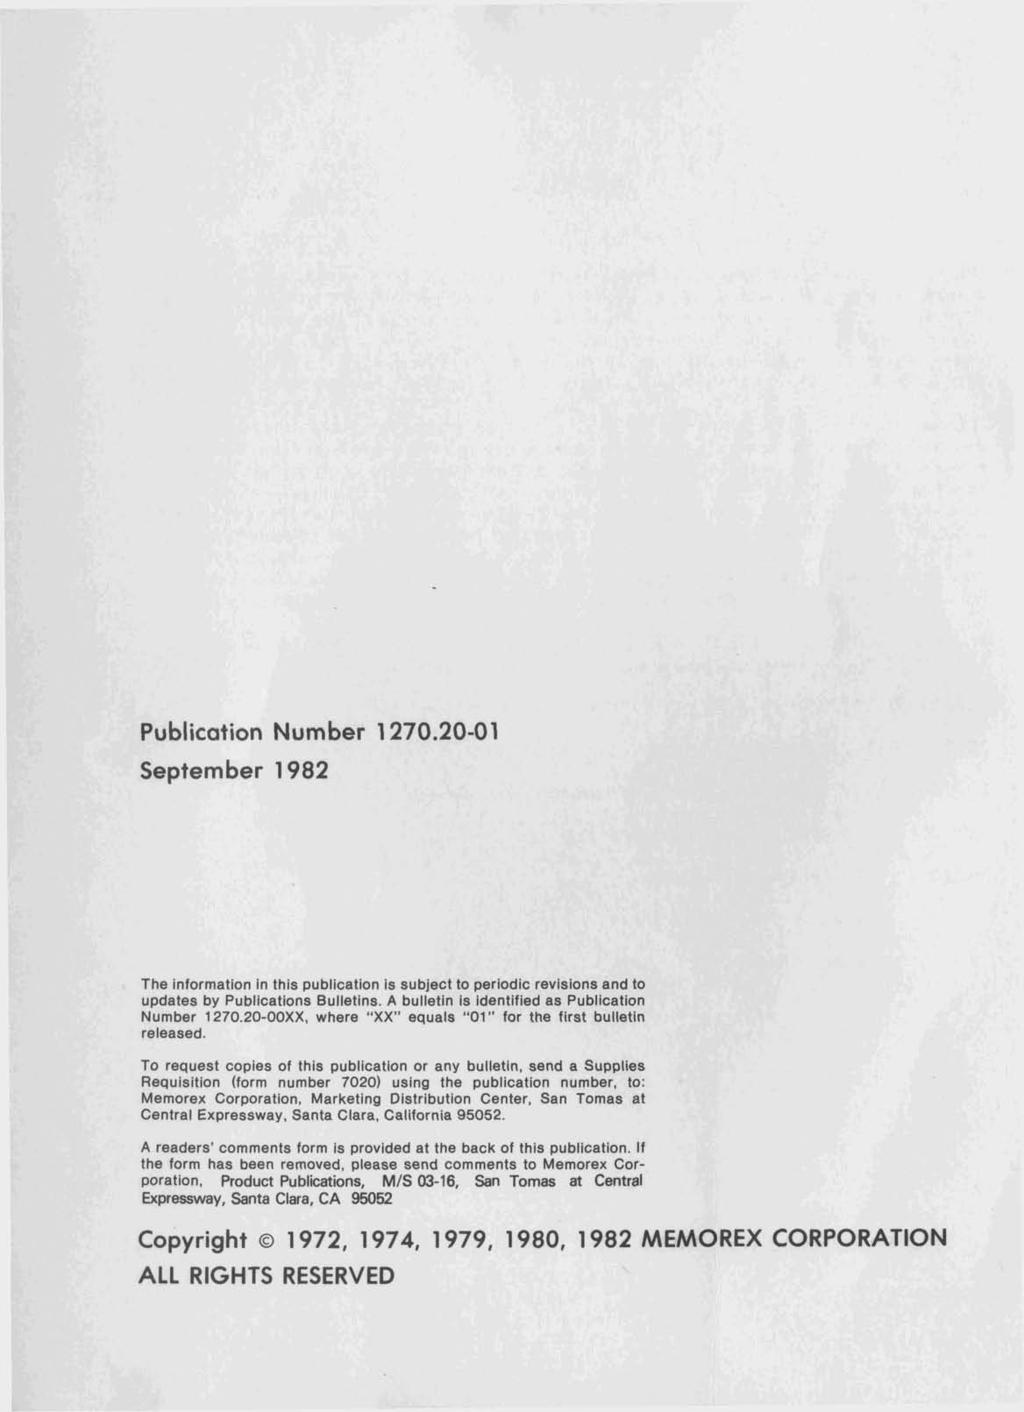 Publication Number 1 270.20-01 September 1982 The information in this publication is subject to periodic revisions and to updates by Publications Bulletins.